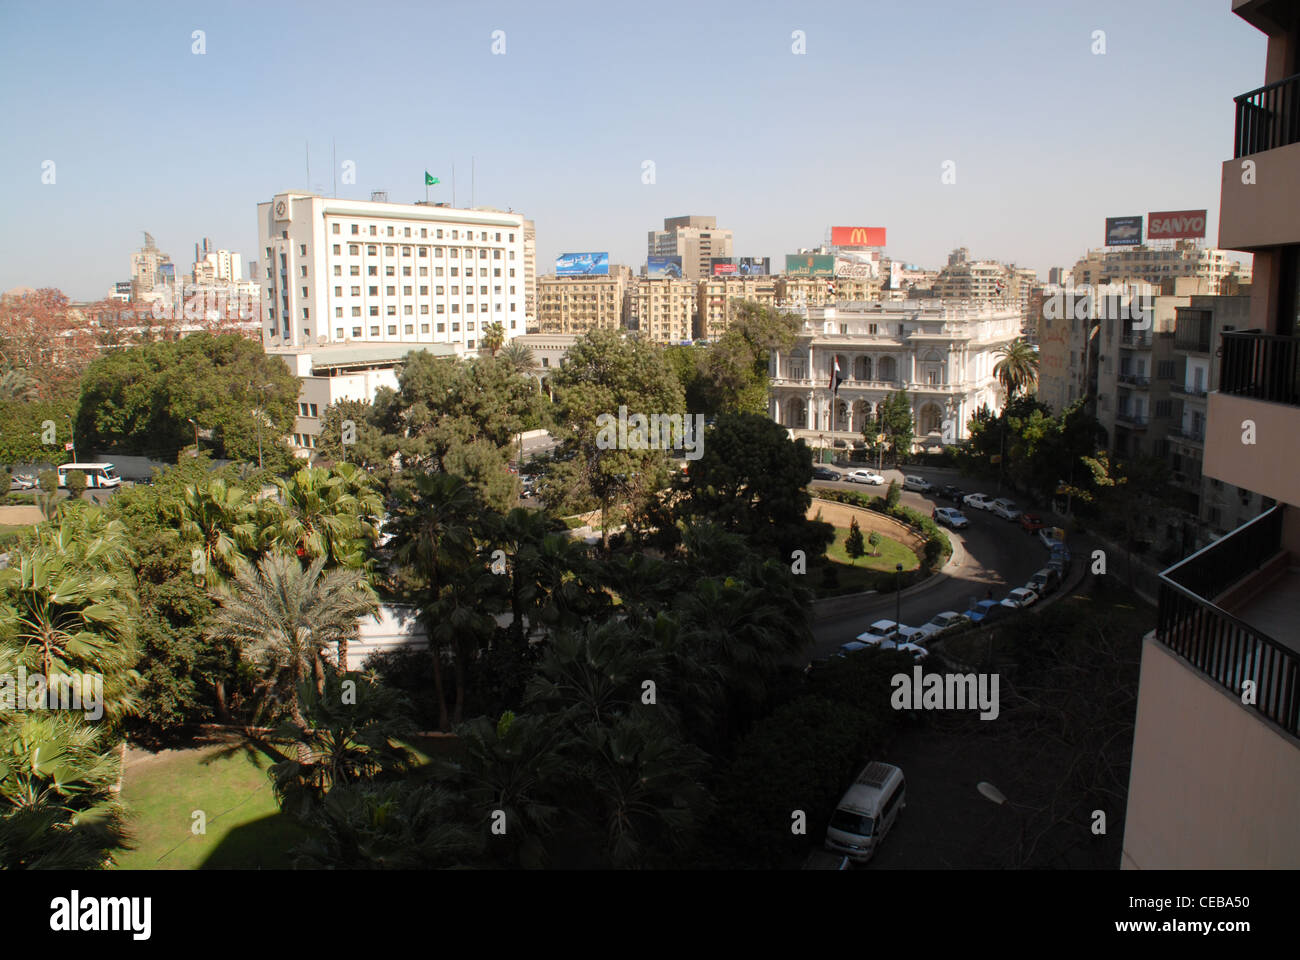 A panorama of central cairo looking south, with the Arab League and Foreign Ministry pictured. Stock Photo